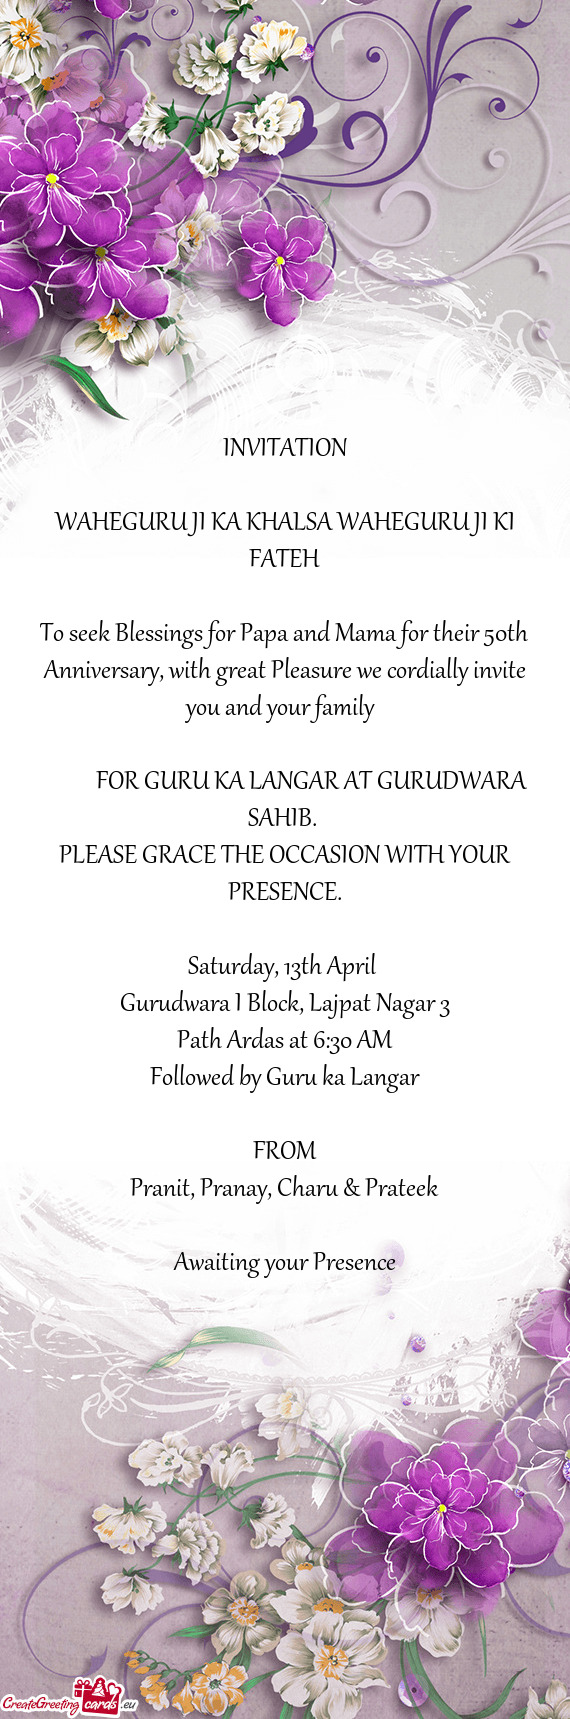 To seek Blessings for Papa and Mama for their 50th Anniversary, with great Pleasure we cordially inv